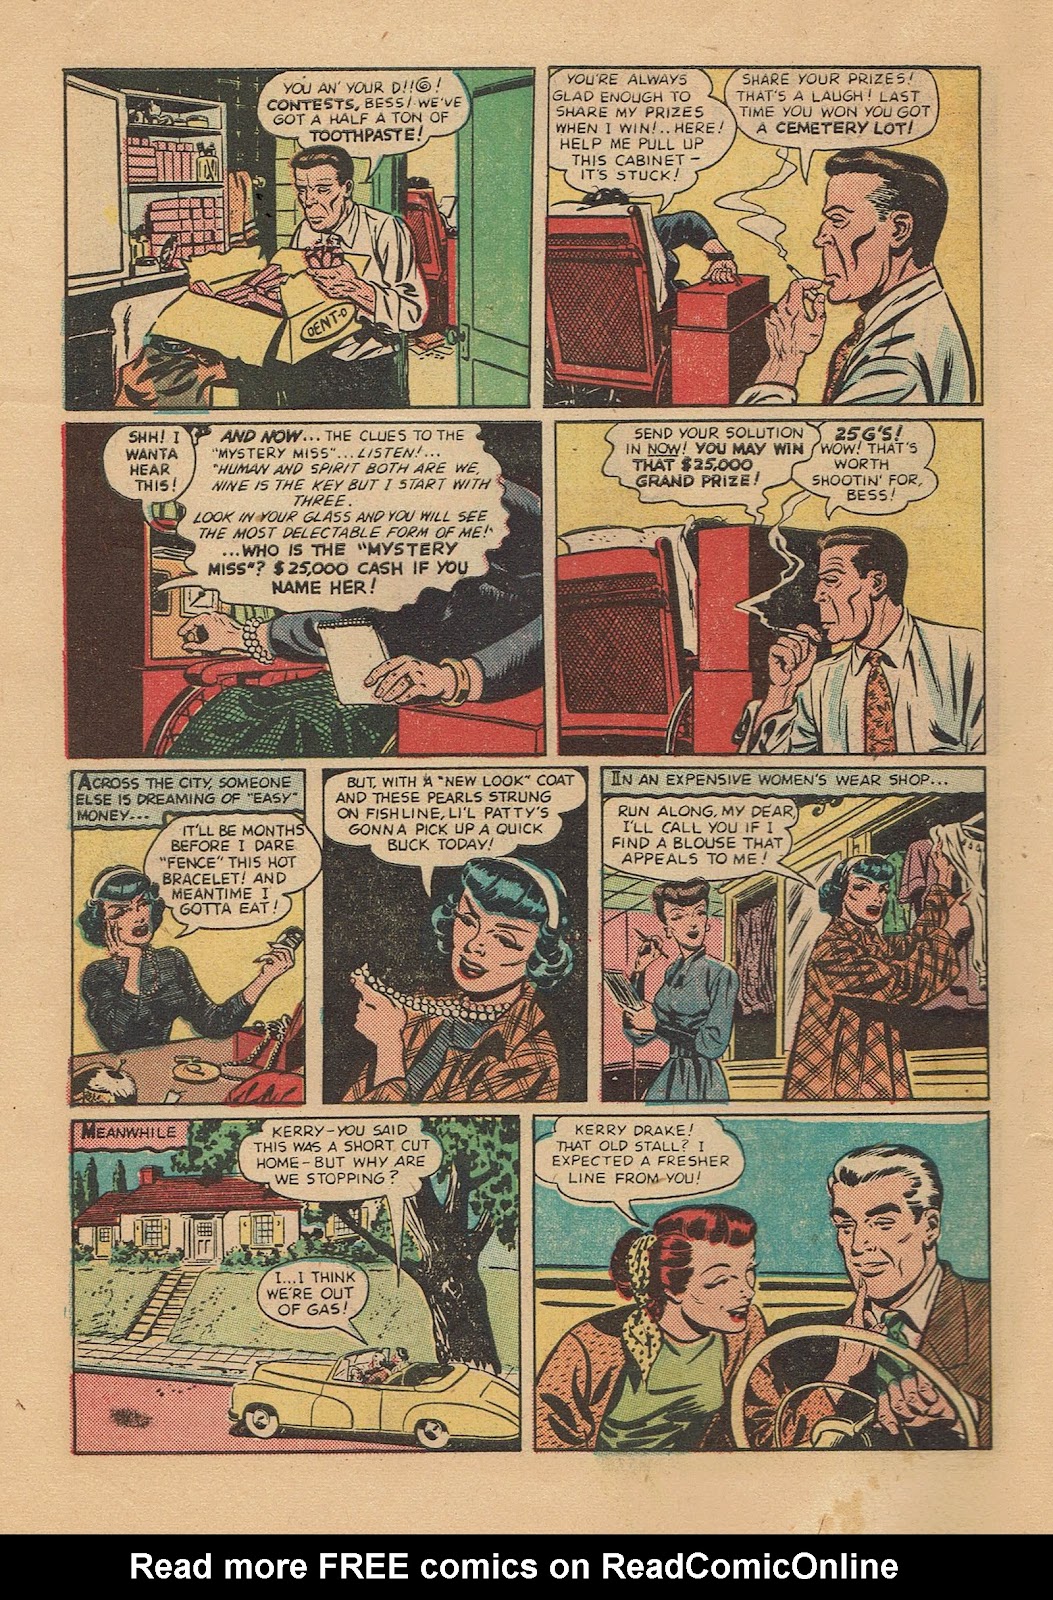 Kerry Drake Detective Cases issue 27 - Page 6